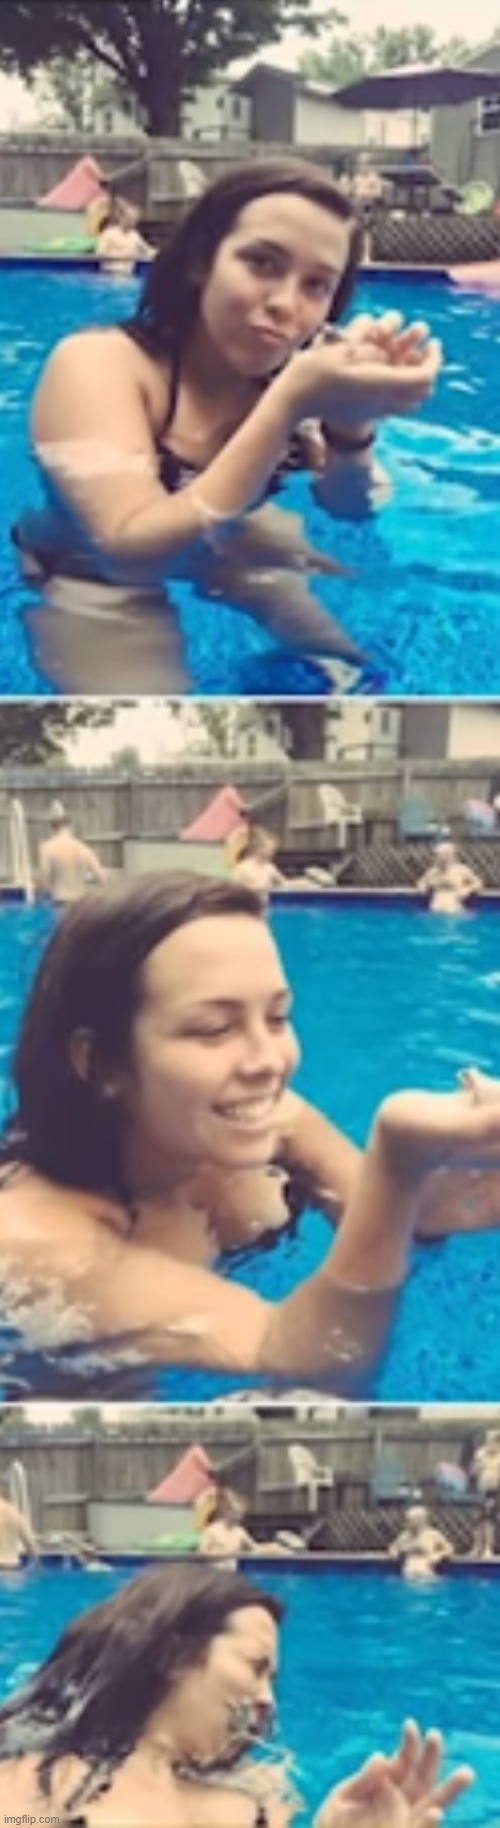 she found a frog in swimming pool | image tagged in memes | made w/ Imgflip meme maker